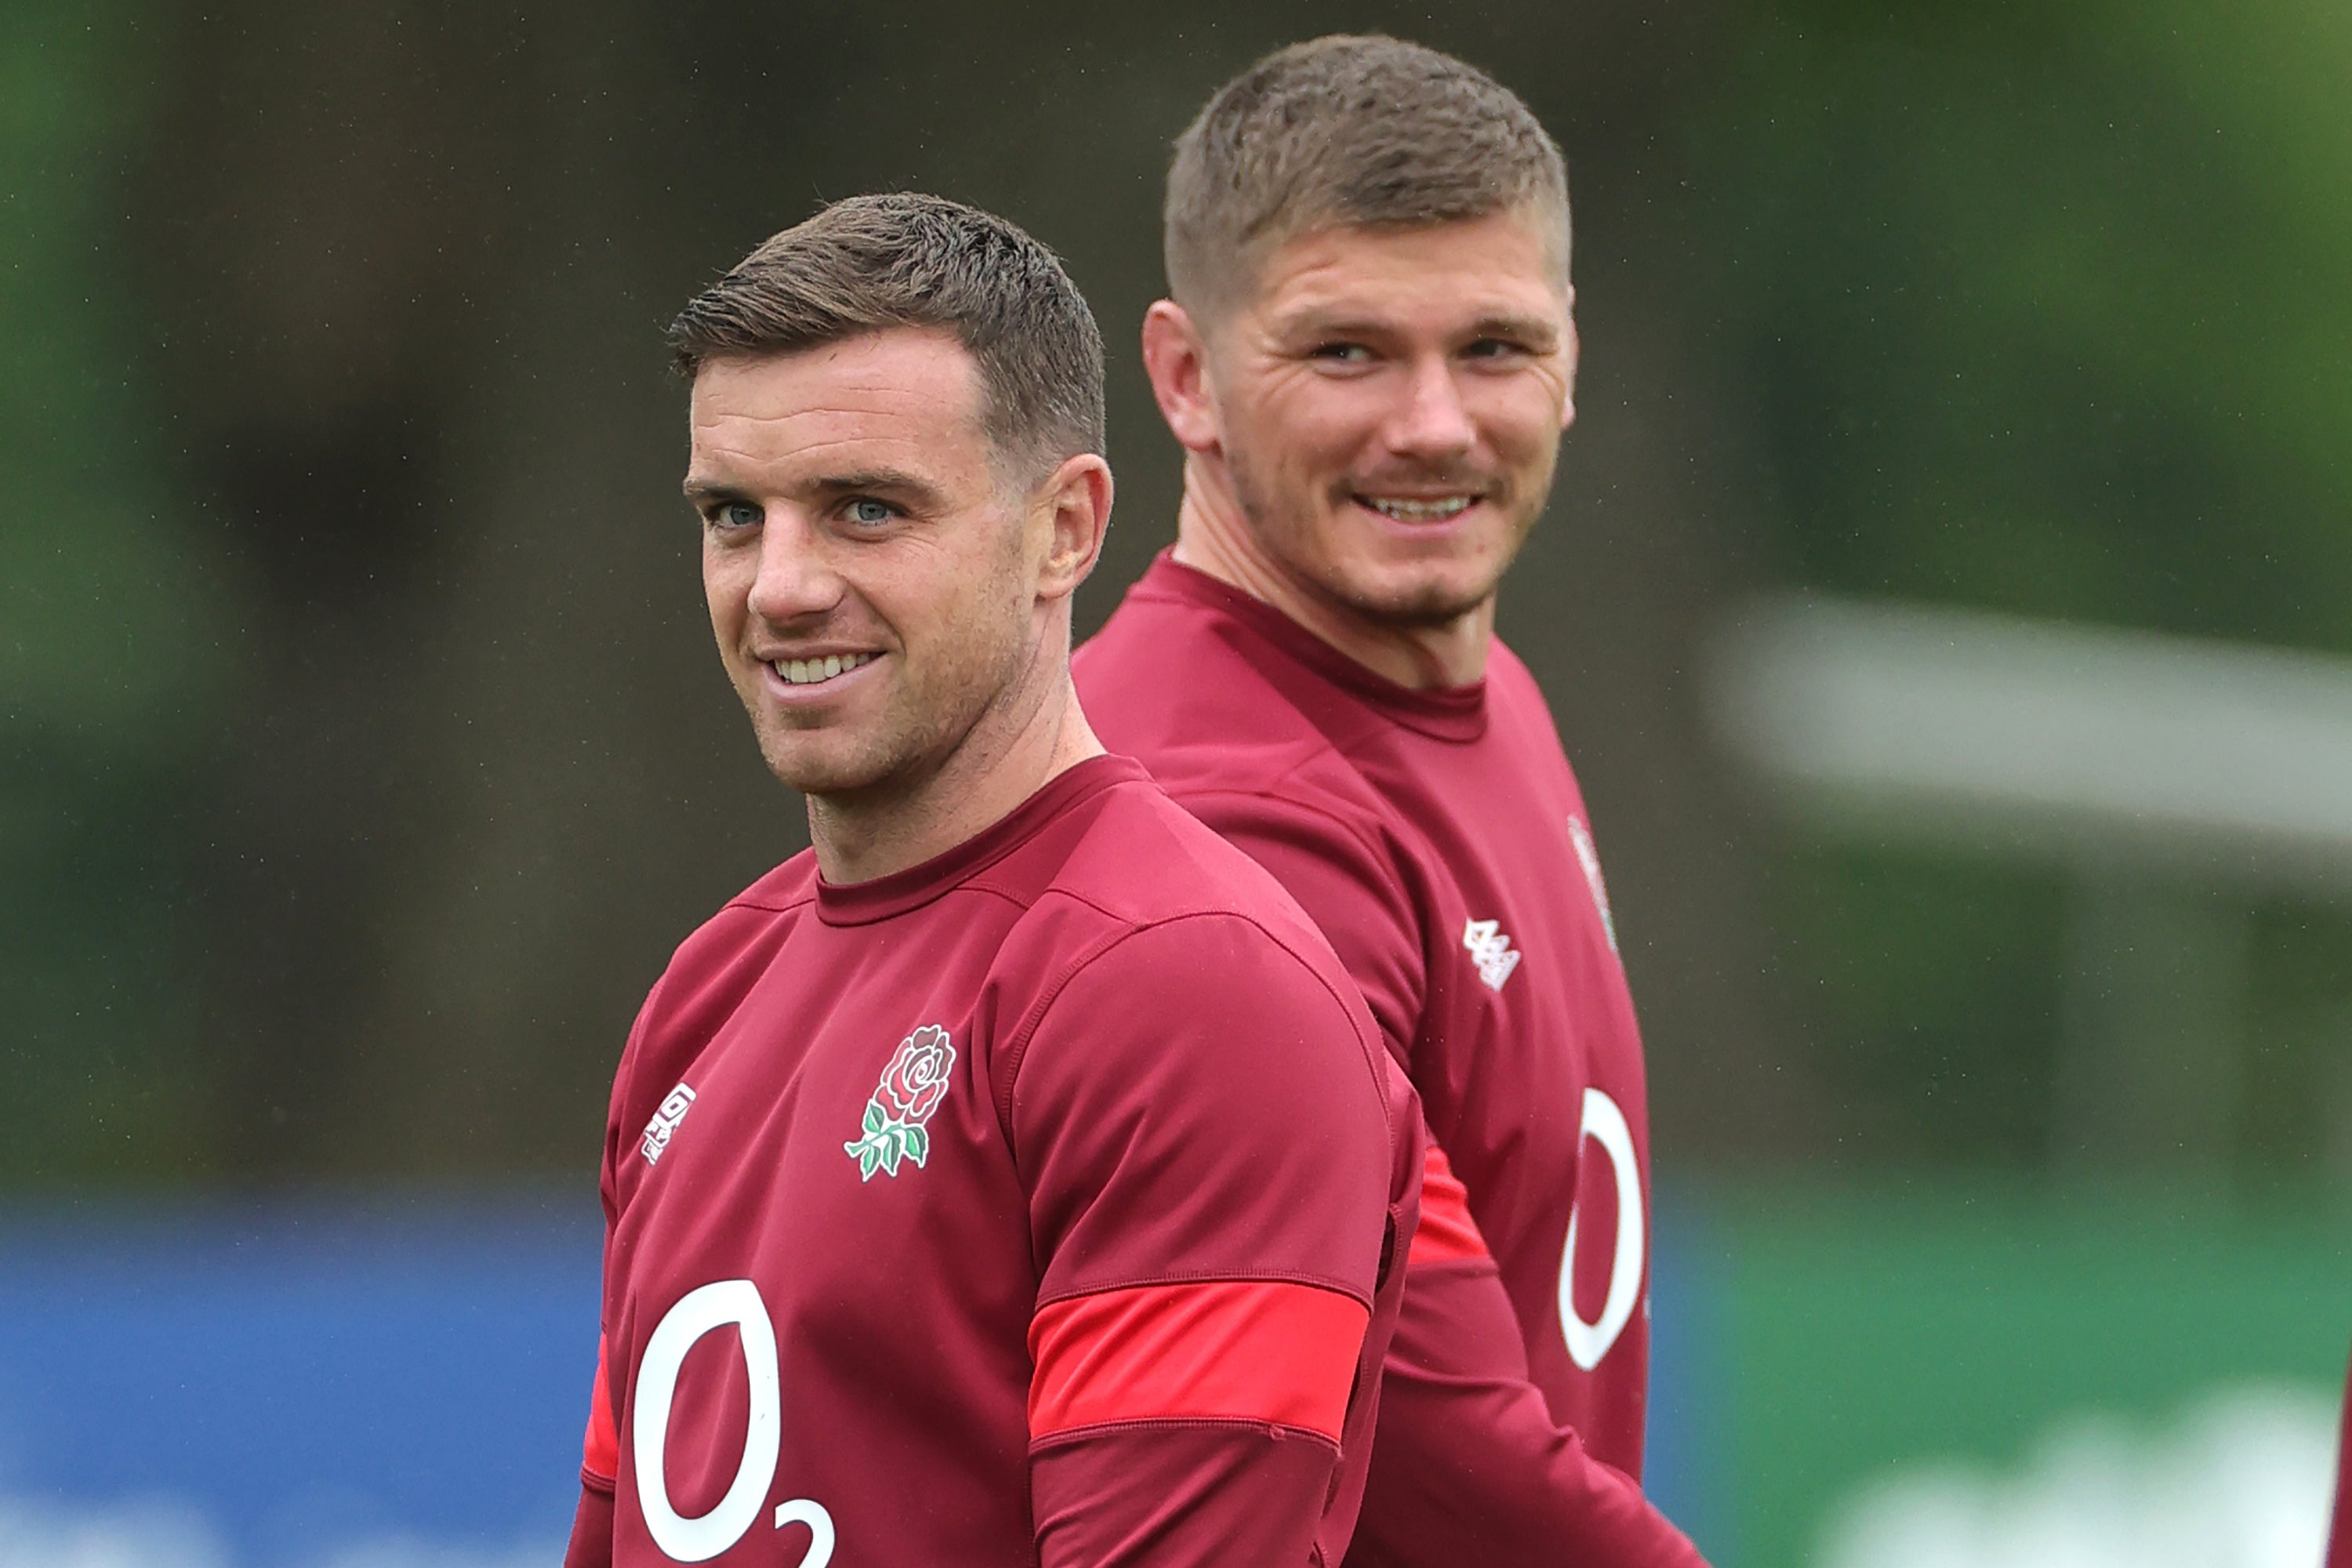 George Ford and Owen Farrell will start together at 10 and 12 for England this weekend